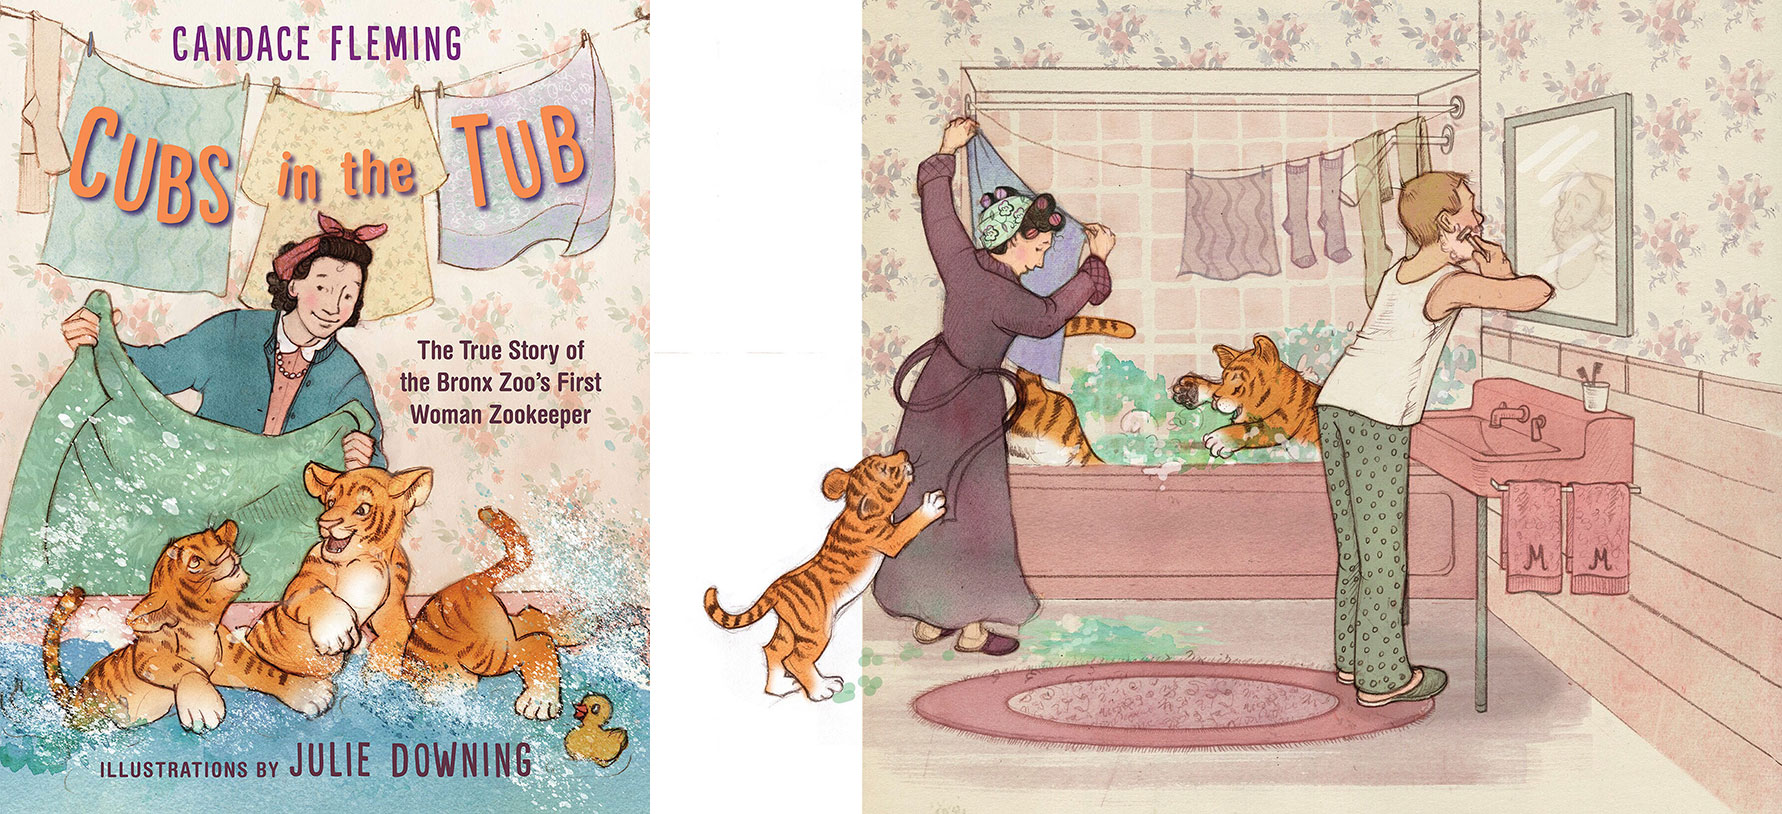 Watercolor cover and page spread of children's book Cubs in the Tub